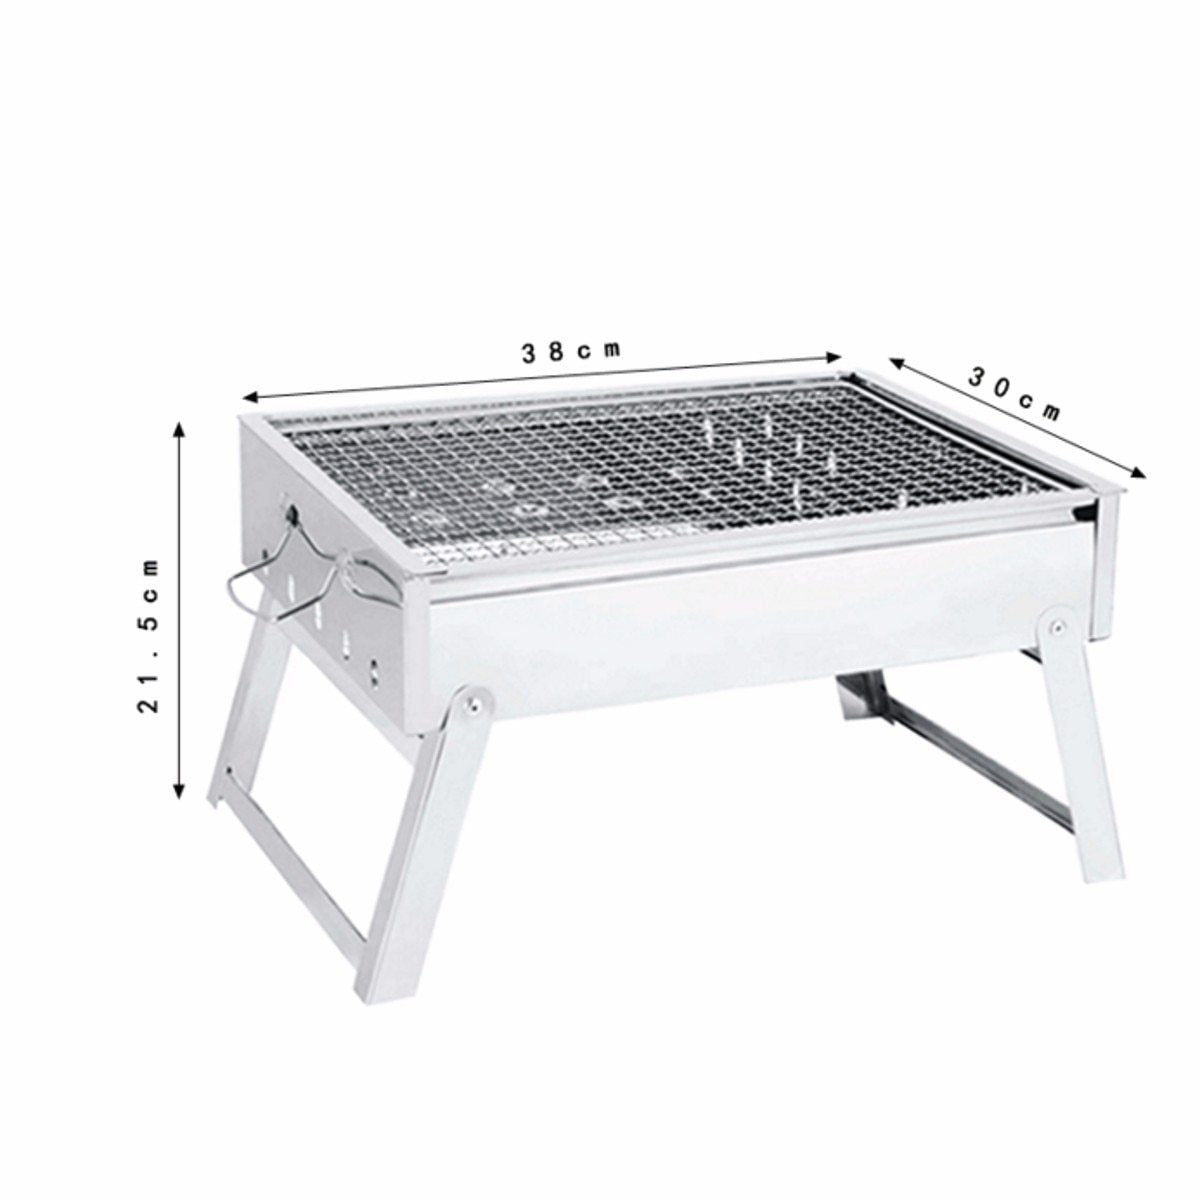 Portable Barbecue Cooking Set